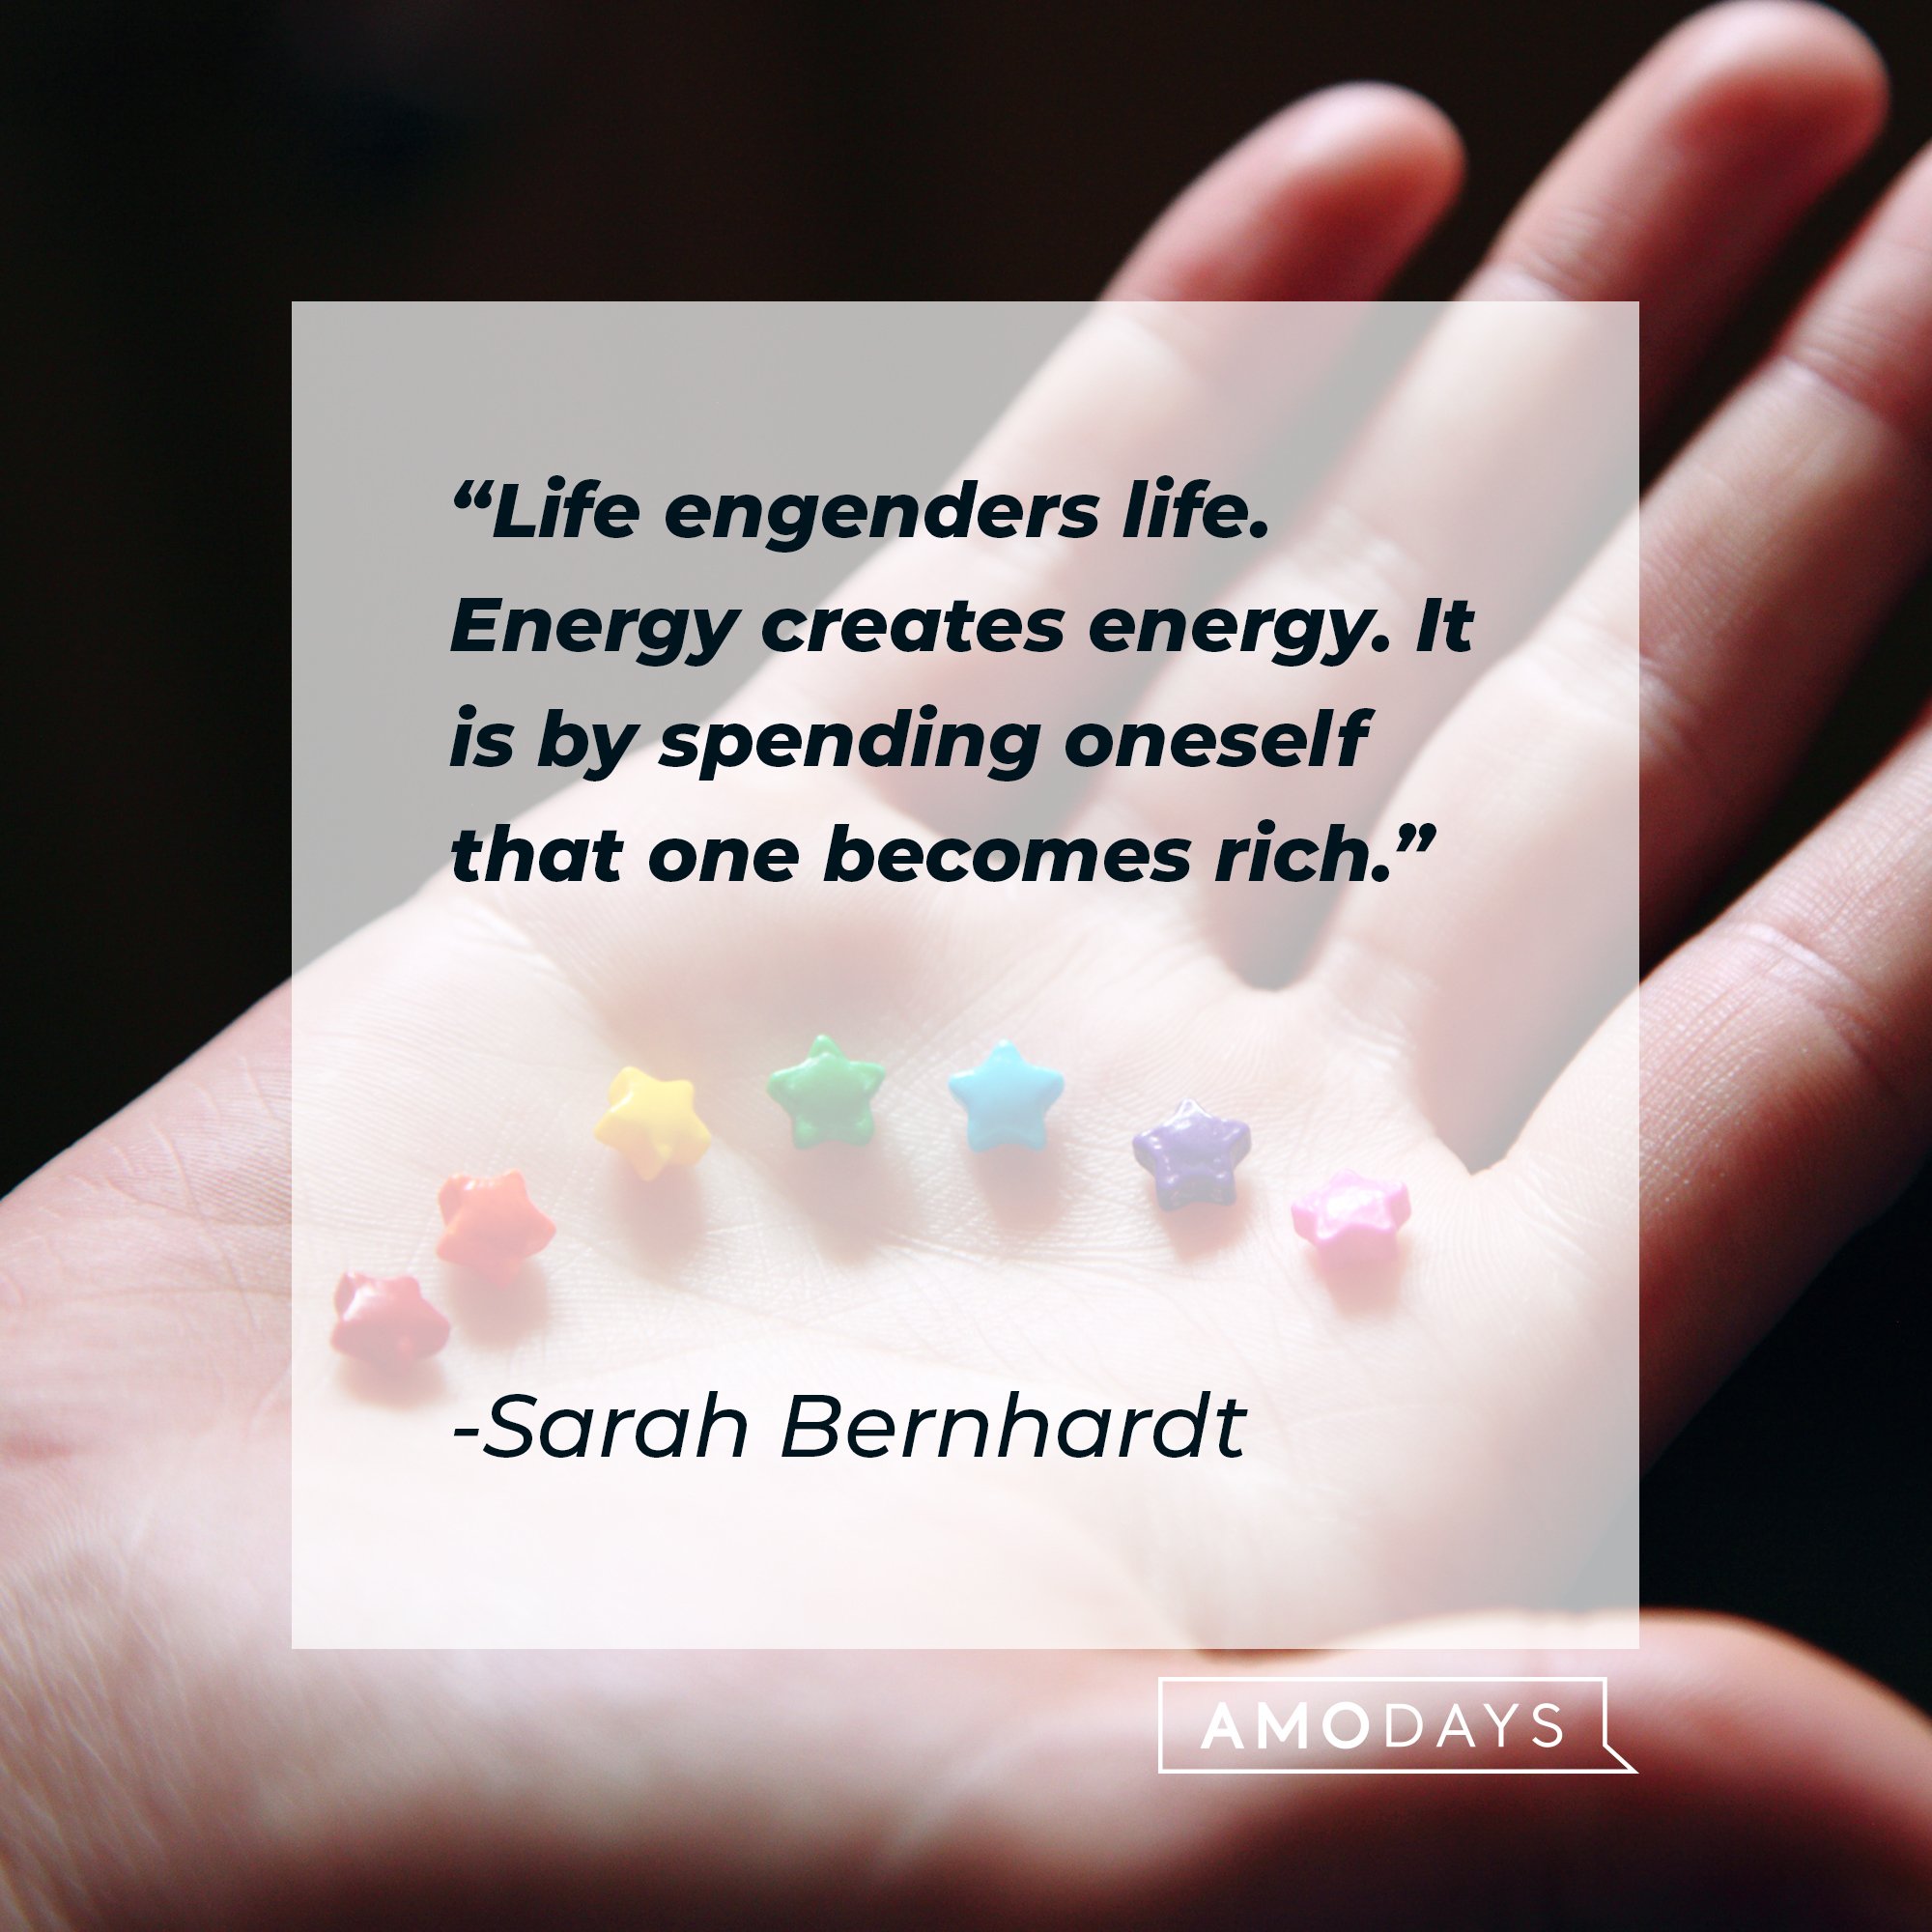 Sarah Bernhardt’s quote: "Life engenders life. Energy creates energy. It is by spending oneself that one becomes rich." | Image: AmoDays